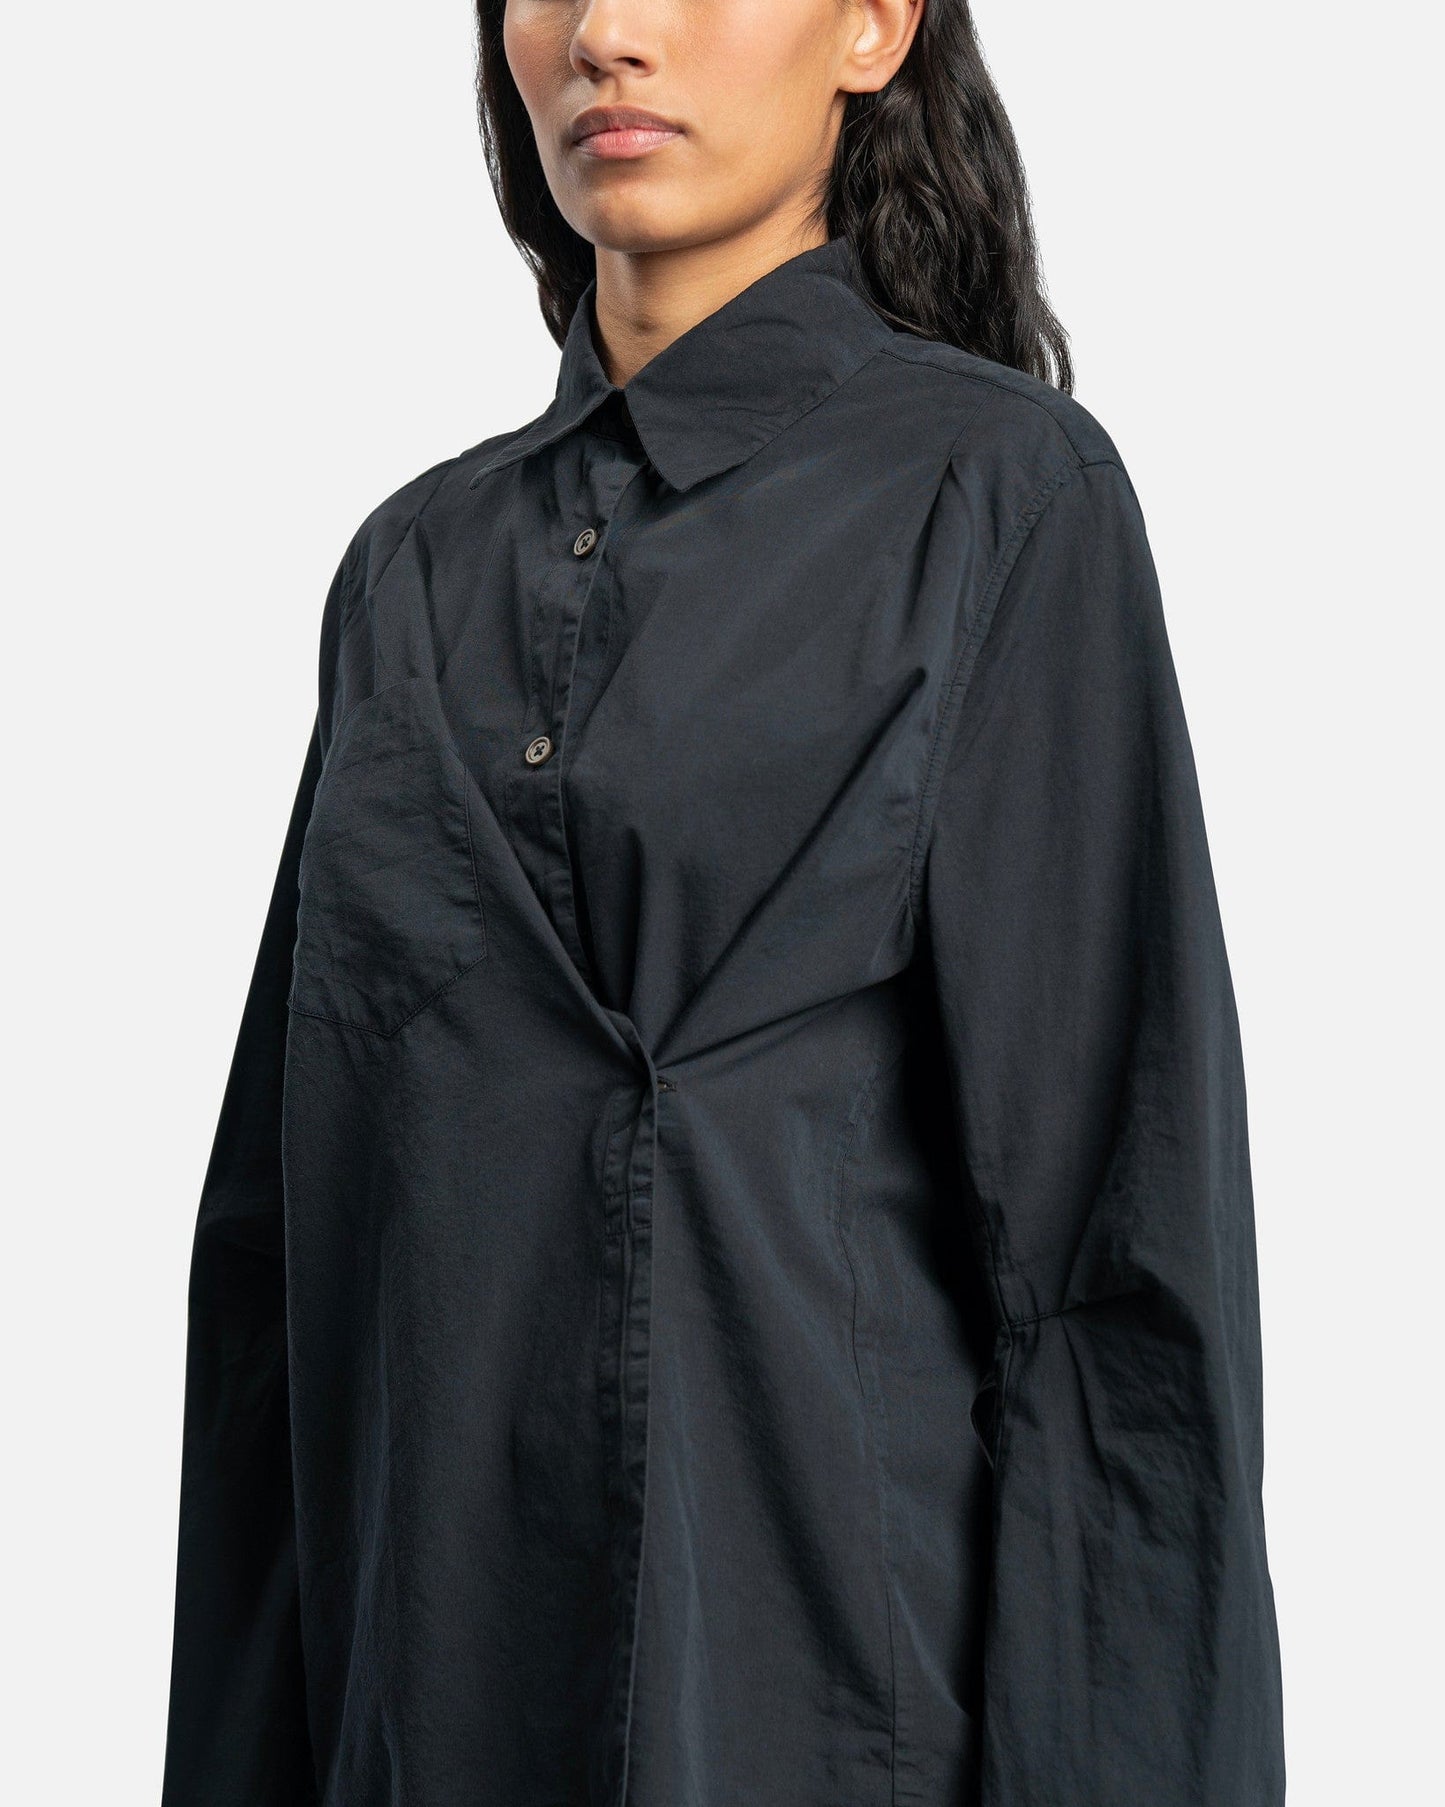 Our Legacy Women Tops Machine Shirt in Antique Black Peached Cupro